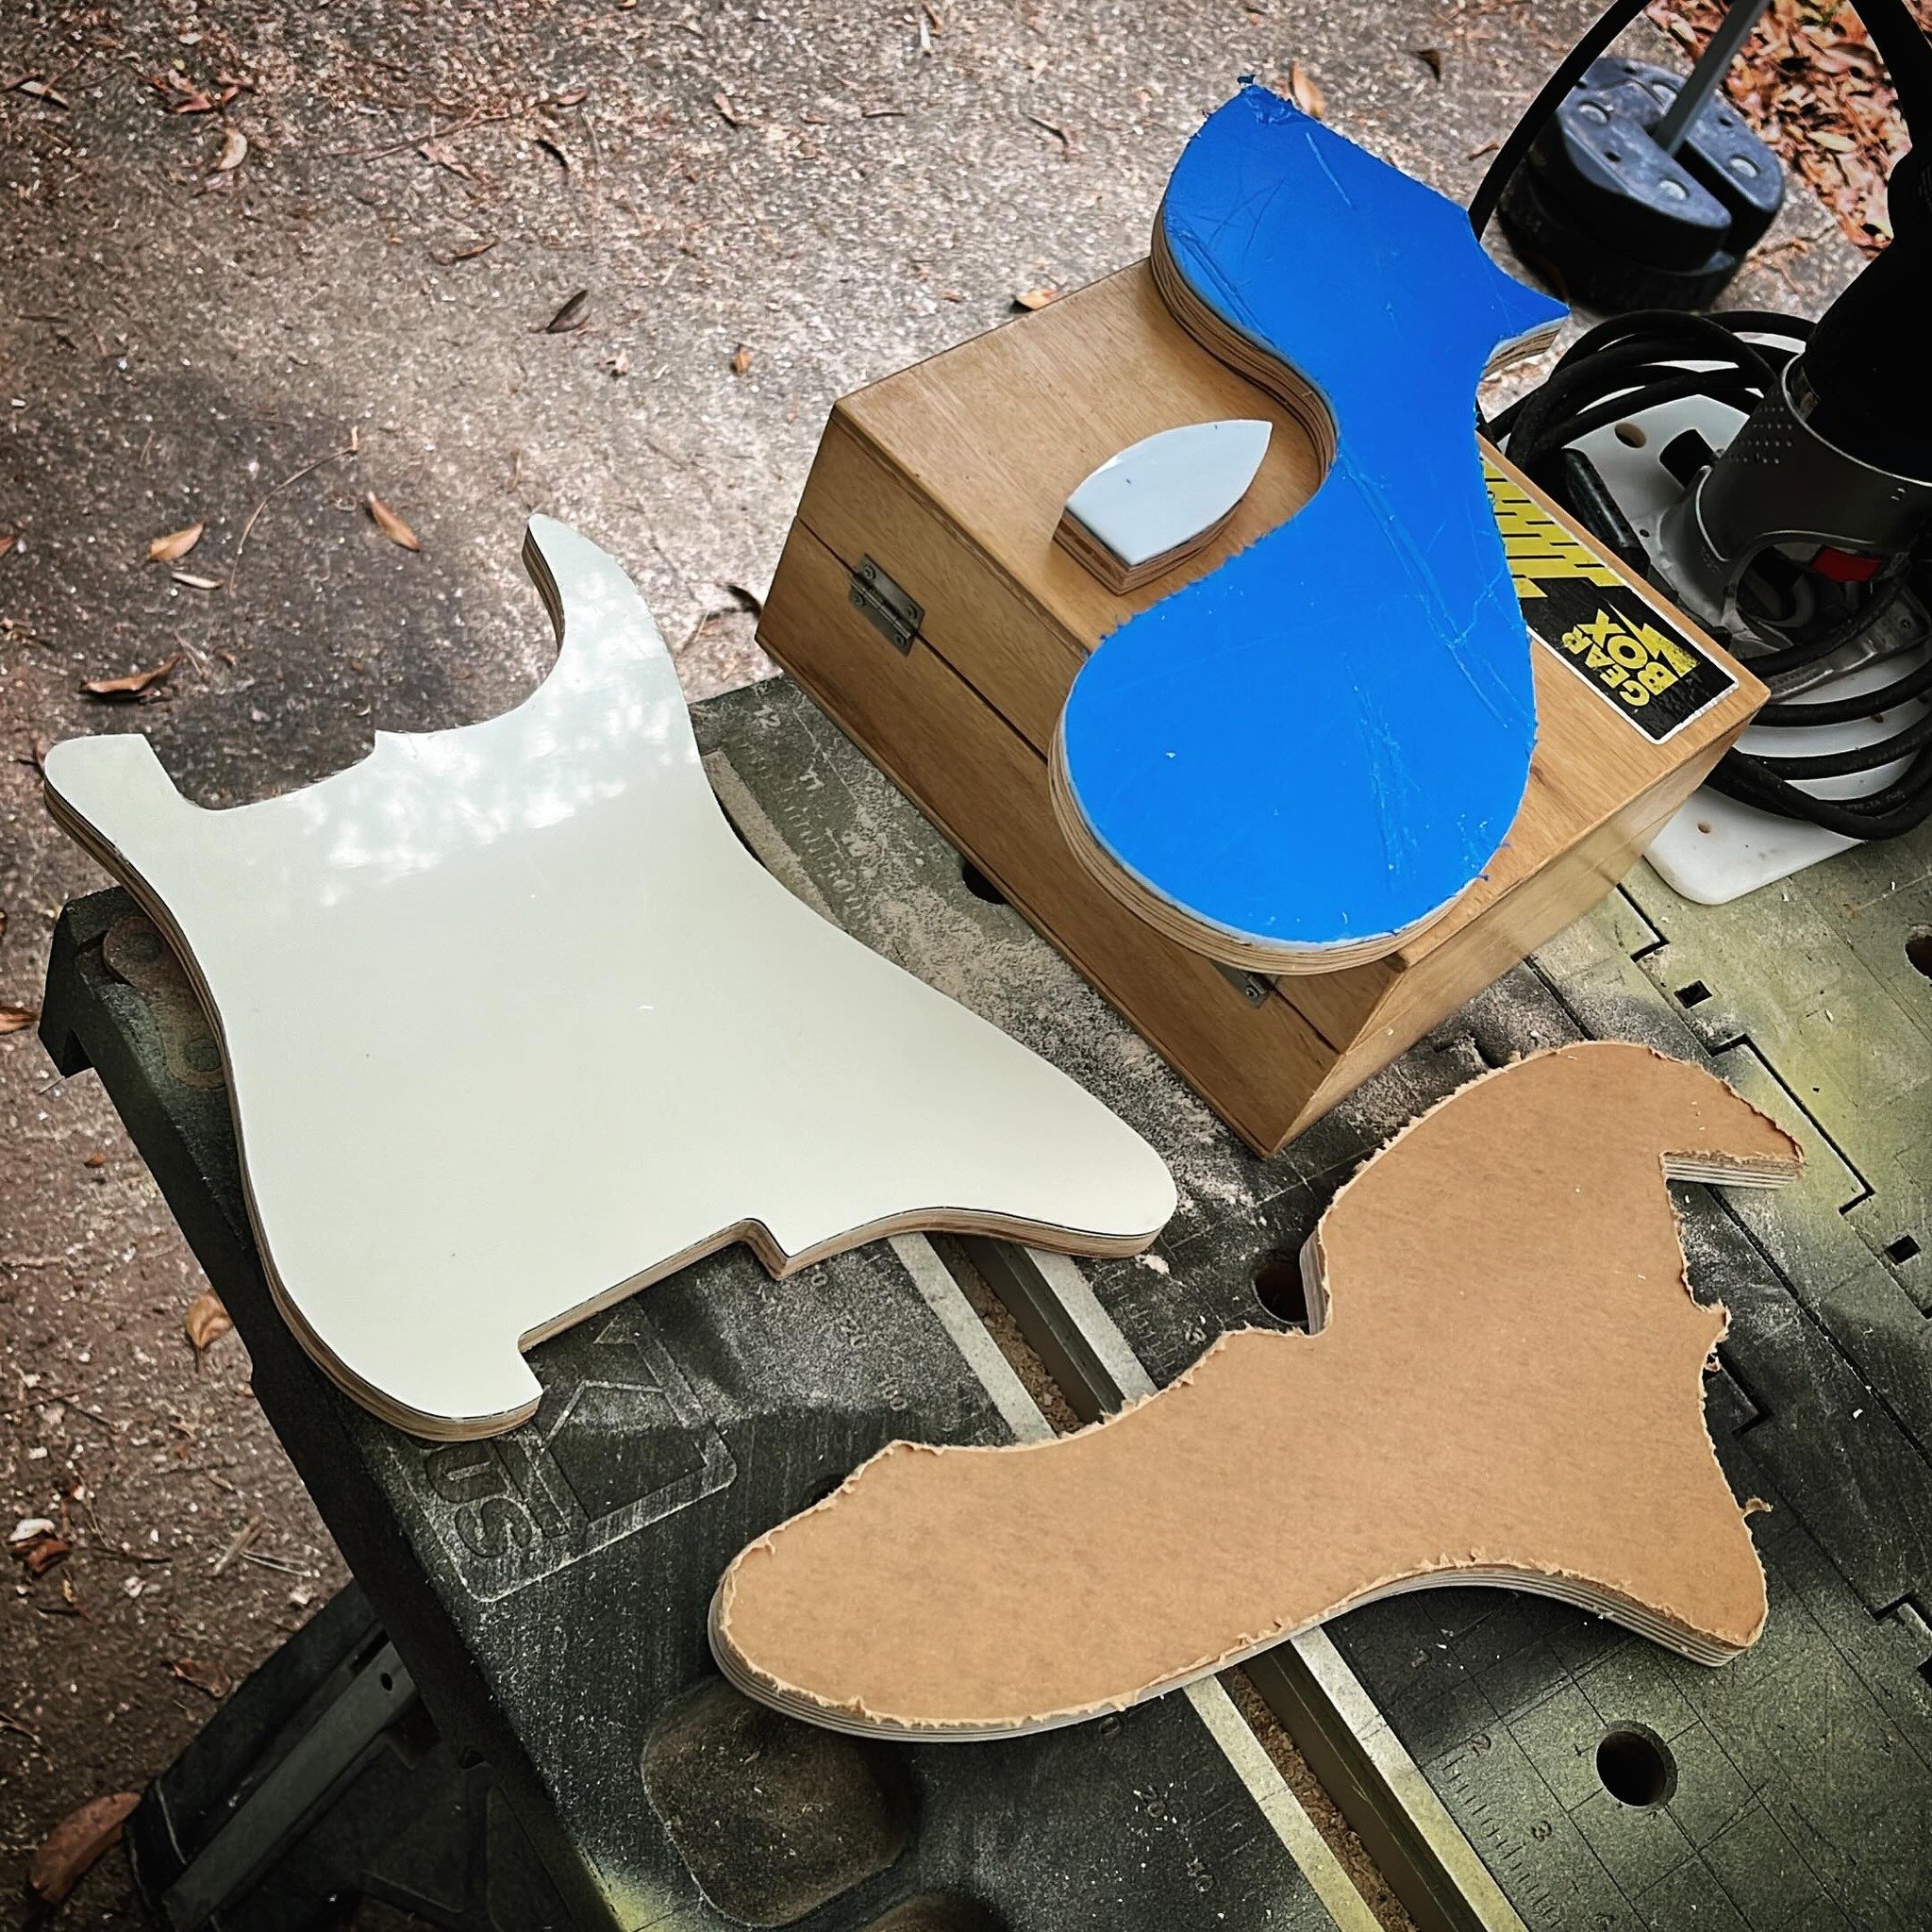 Making some pickguards today. Can you guess all three guitars?

#redeemedguitars #pickguard #pickguards #custom